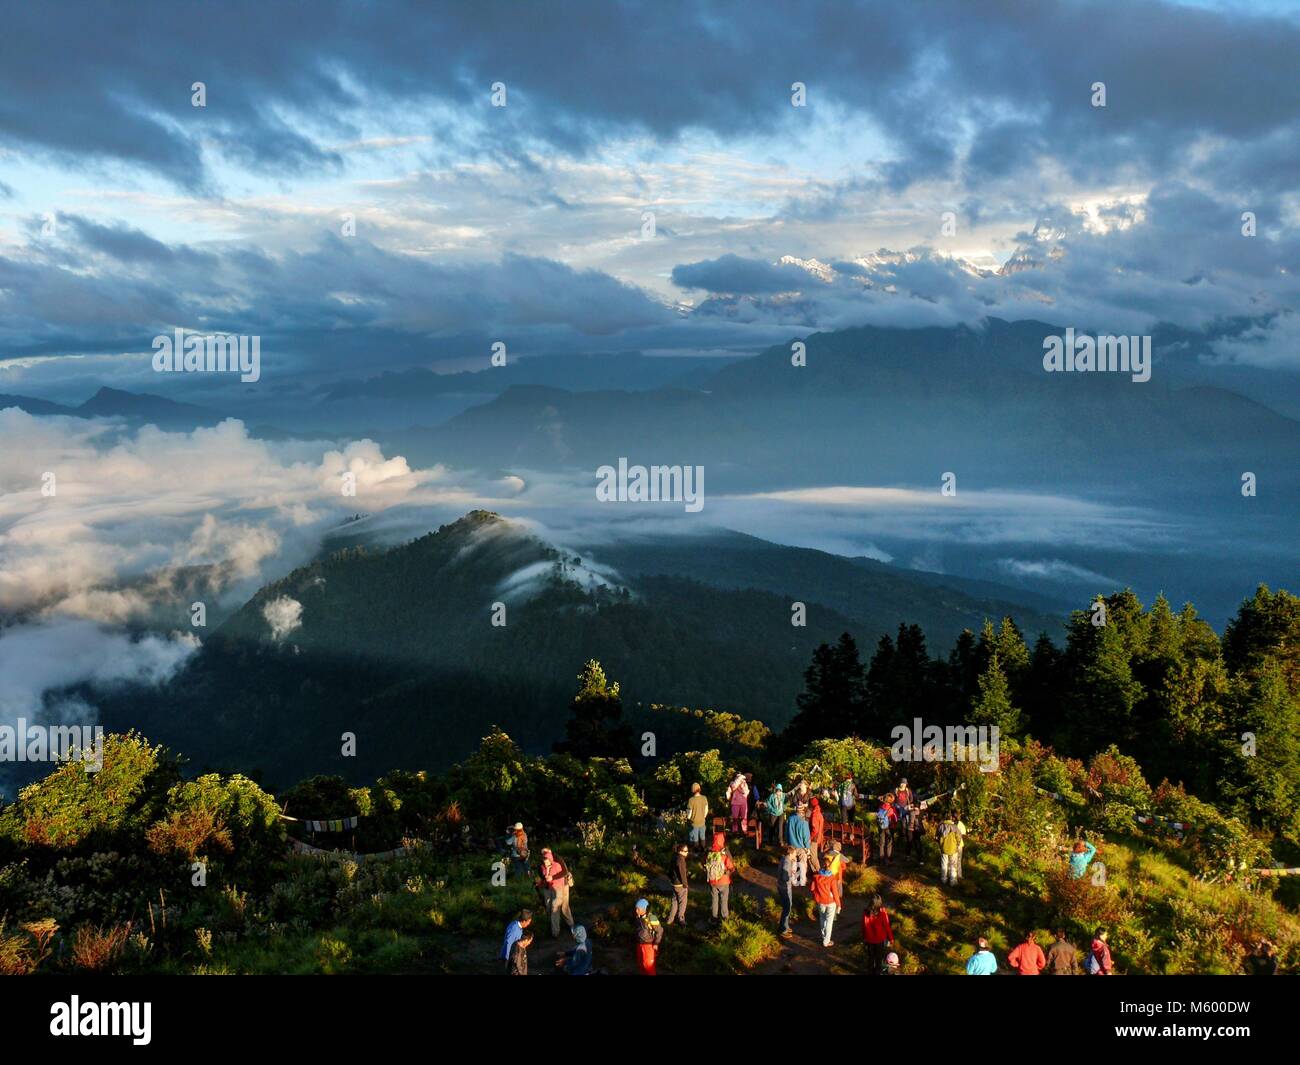 Ghorepani Poon Hill, Nepal, september 27, 2013: one of the most visited Himalayan view points in Nepal, Tourist looking to snow capped Himalaya Stock Photo